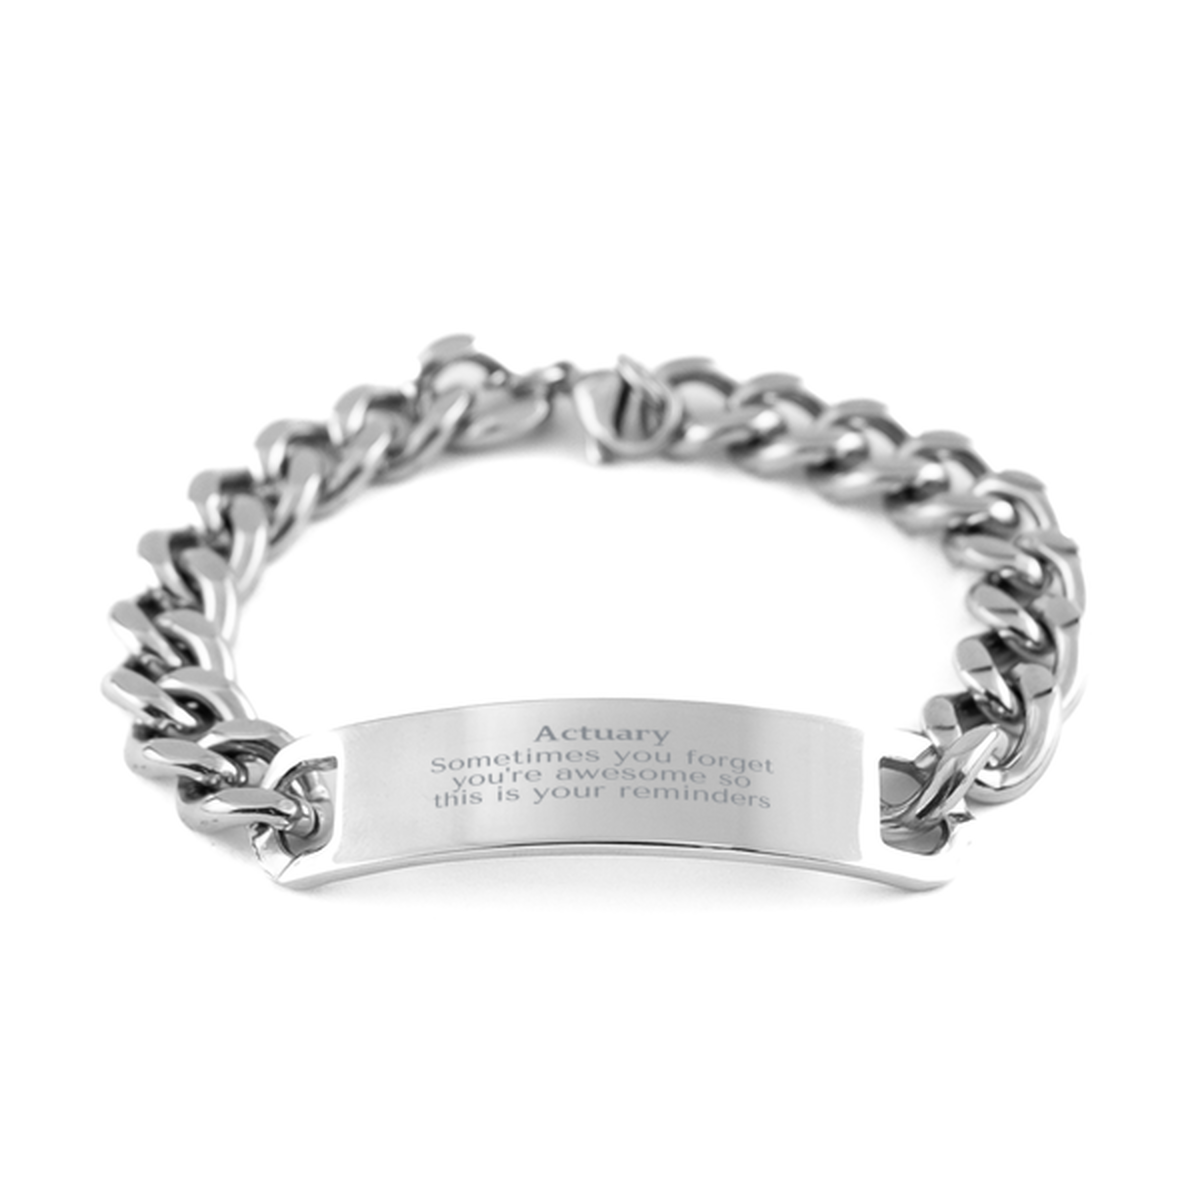 Sentimental Actuary Cuban Chain Stainless Steel Bracelet, Actuary Sometimes you forget you're awesome so this is your reminders, Graduation Christmas Birthday Gifts for Actuary, Men, Women, Coworkers